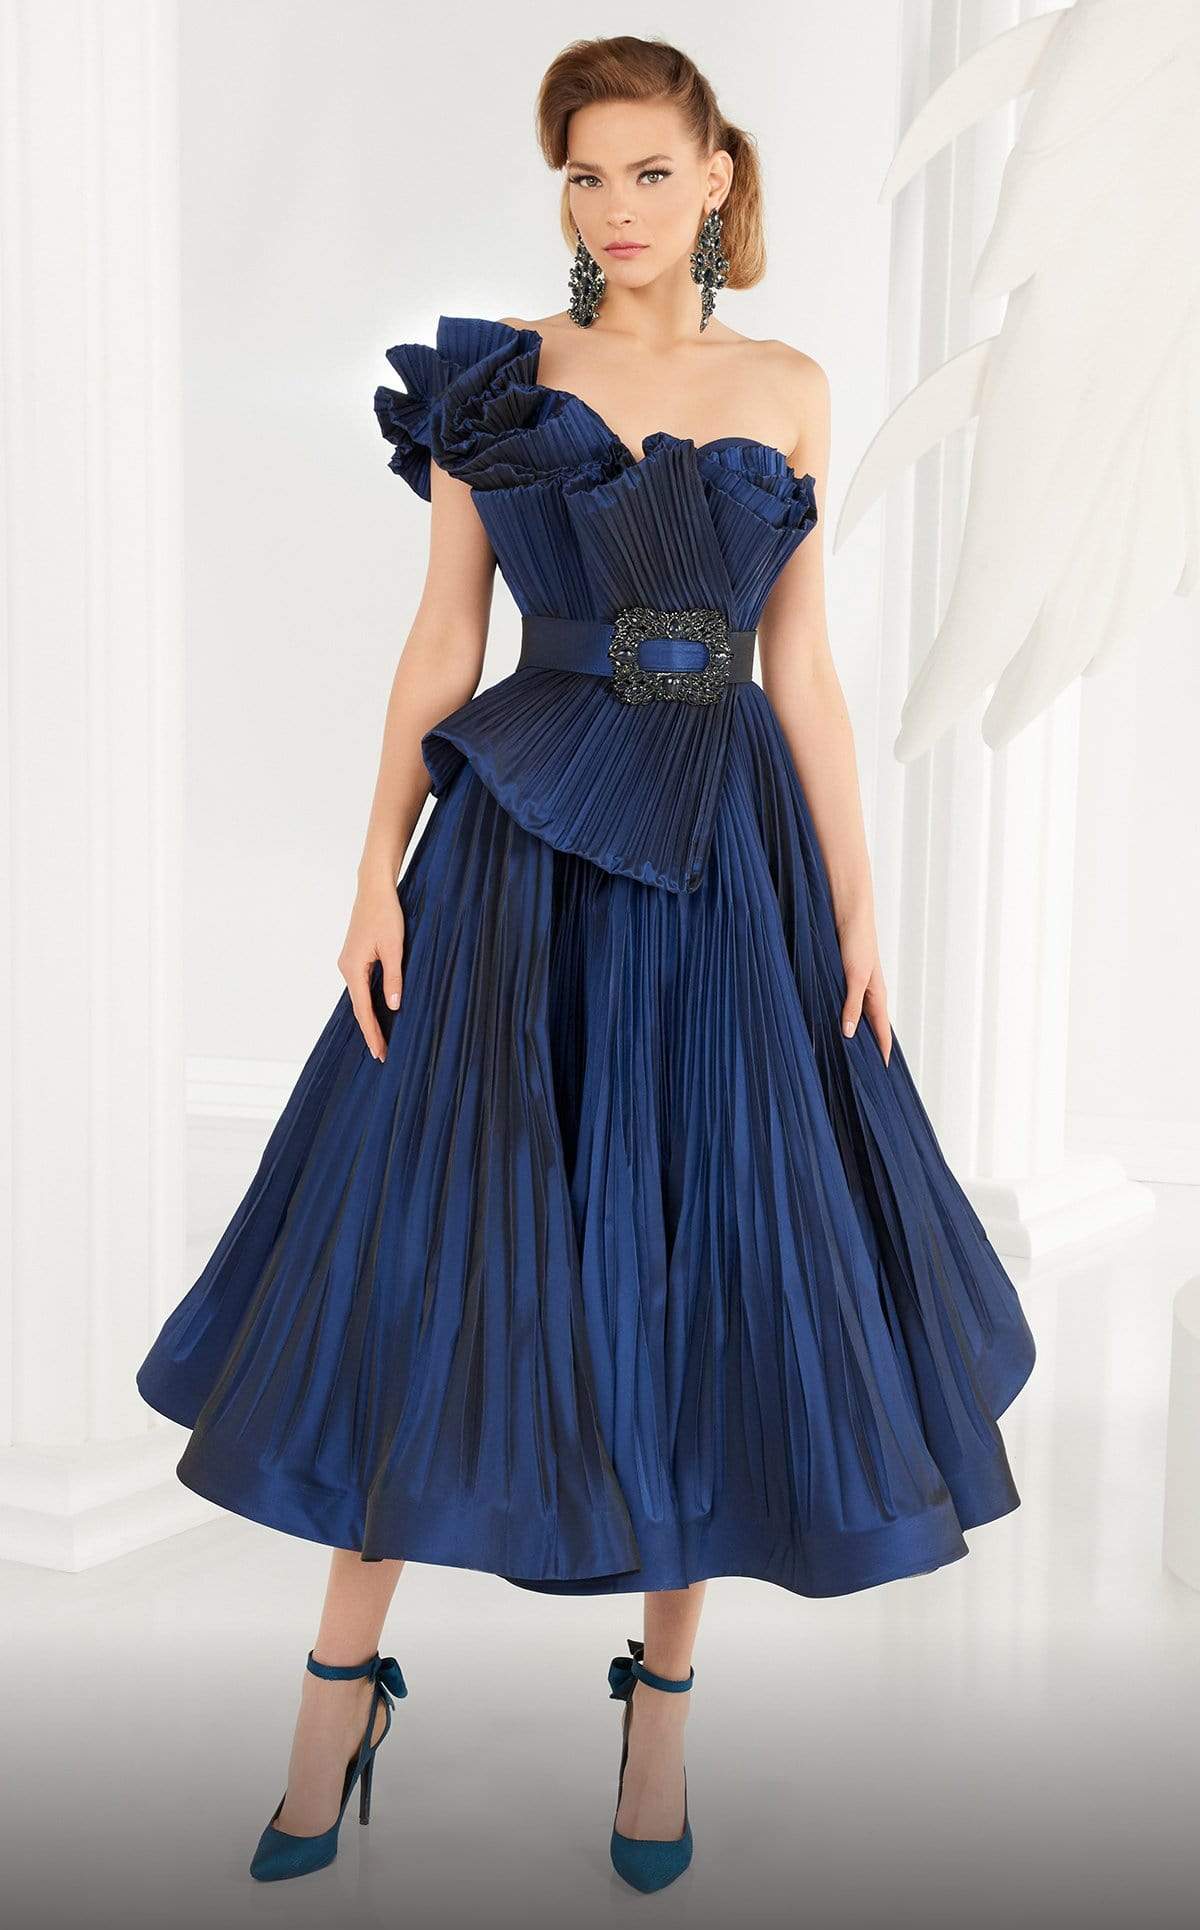 MNM Couture - 2565 Peplum Style Tea-Length Dress Special Occasion Dresses 4 / Navy Blue